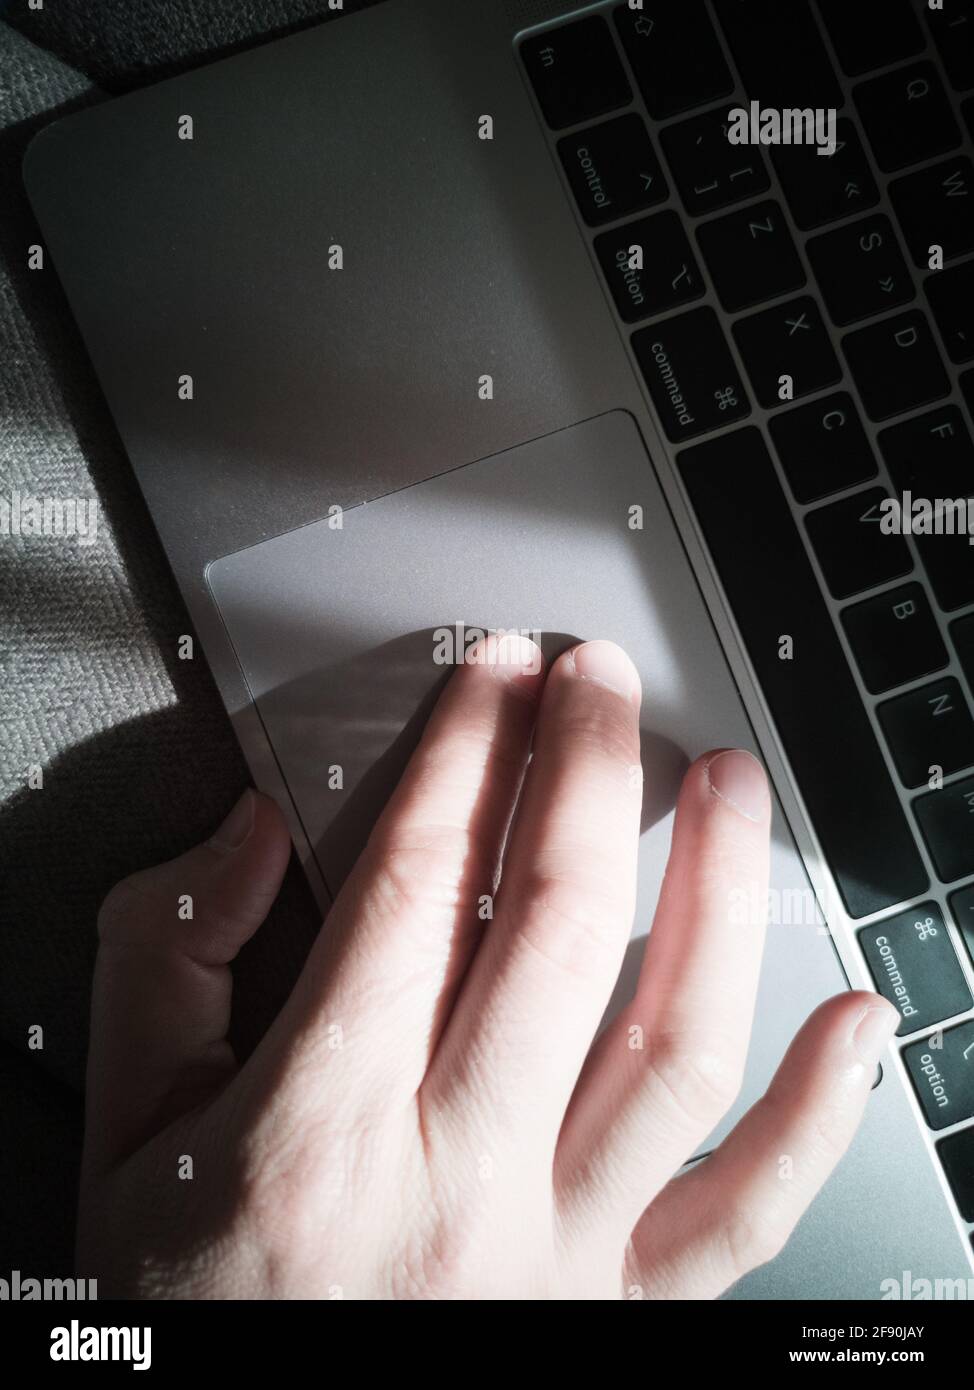 Man's hand on the laptop keyboard touchpad. Top view. Stock Photo